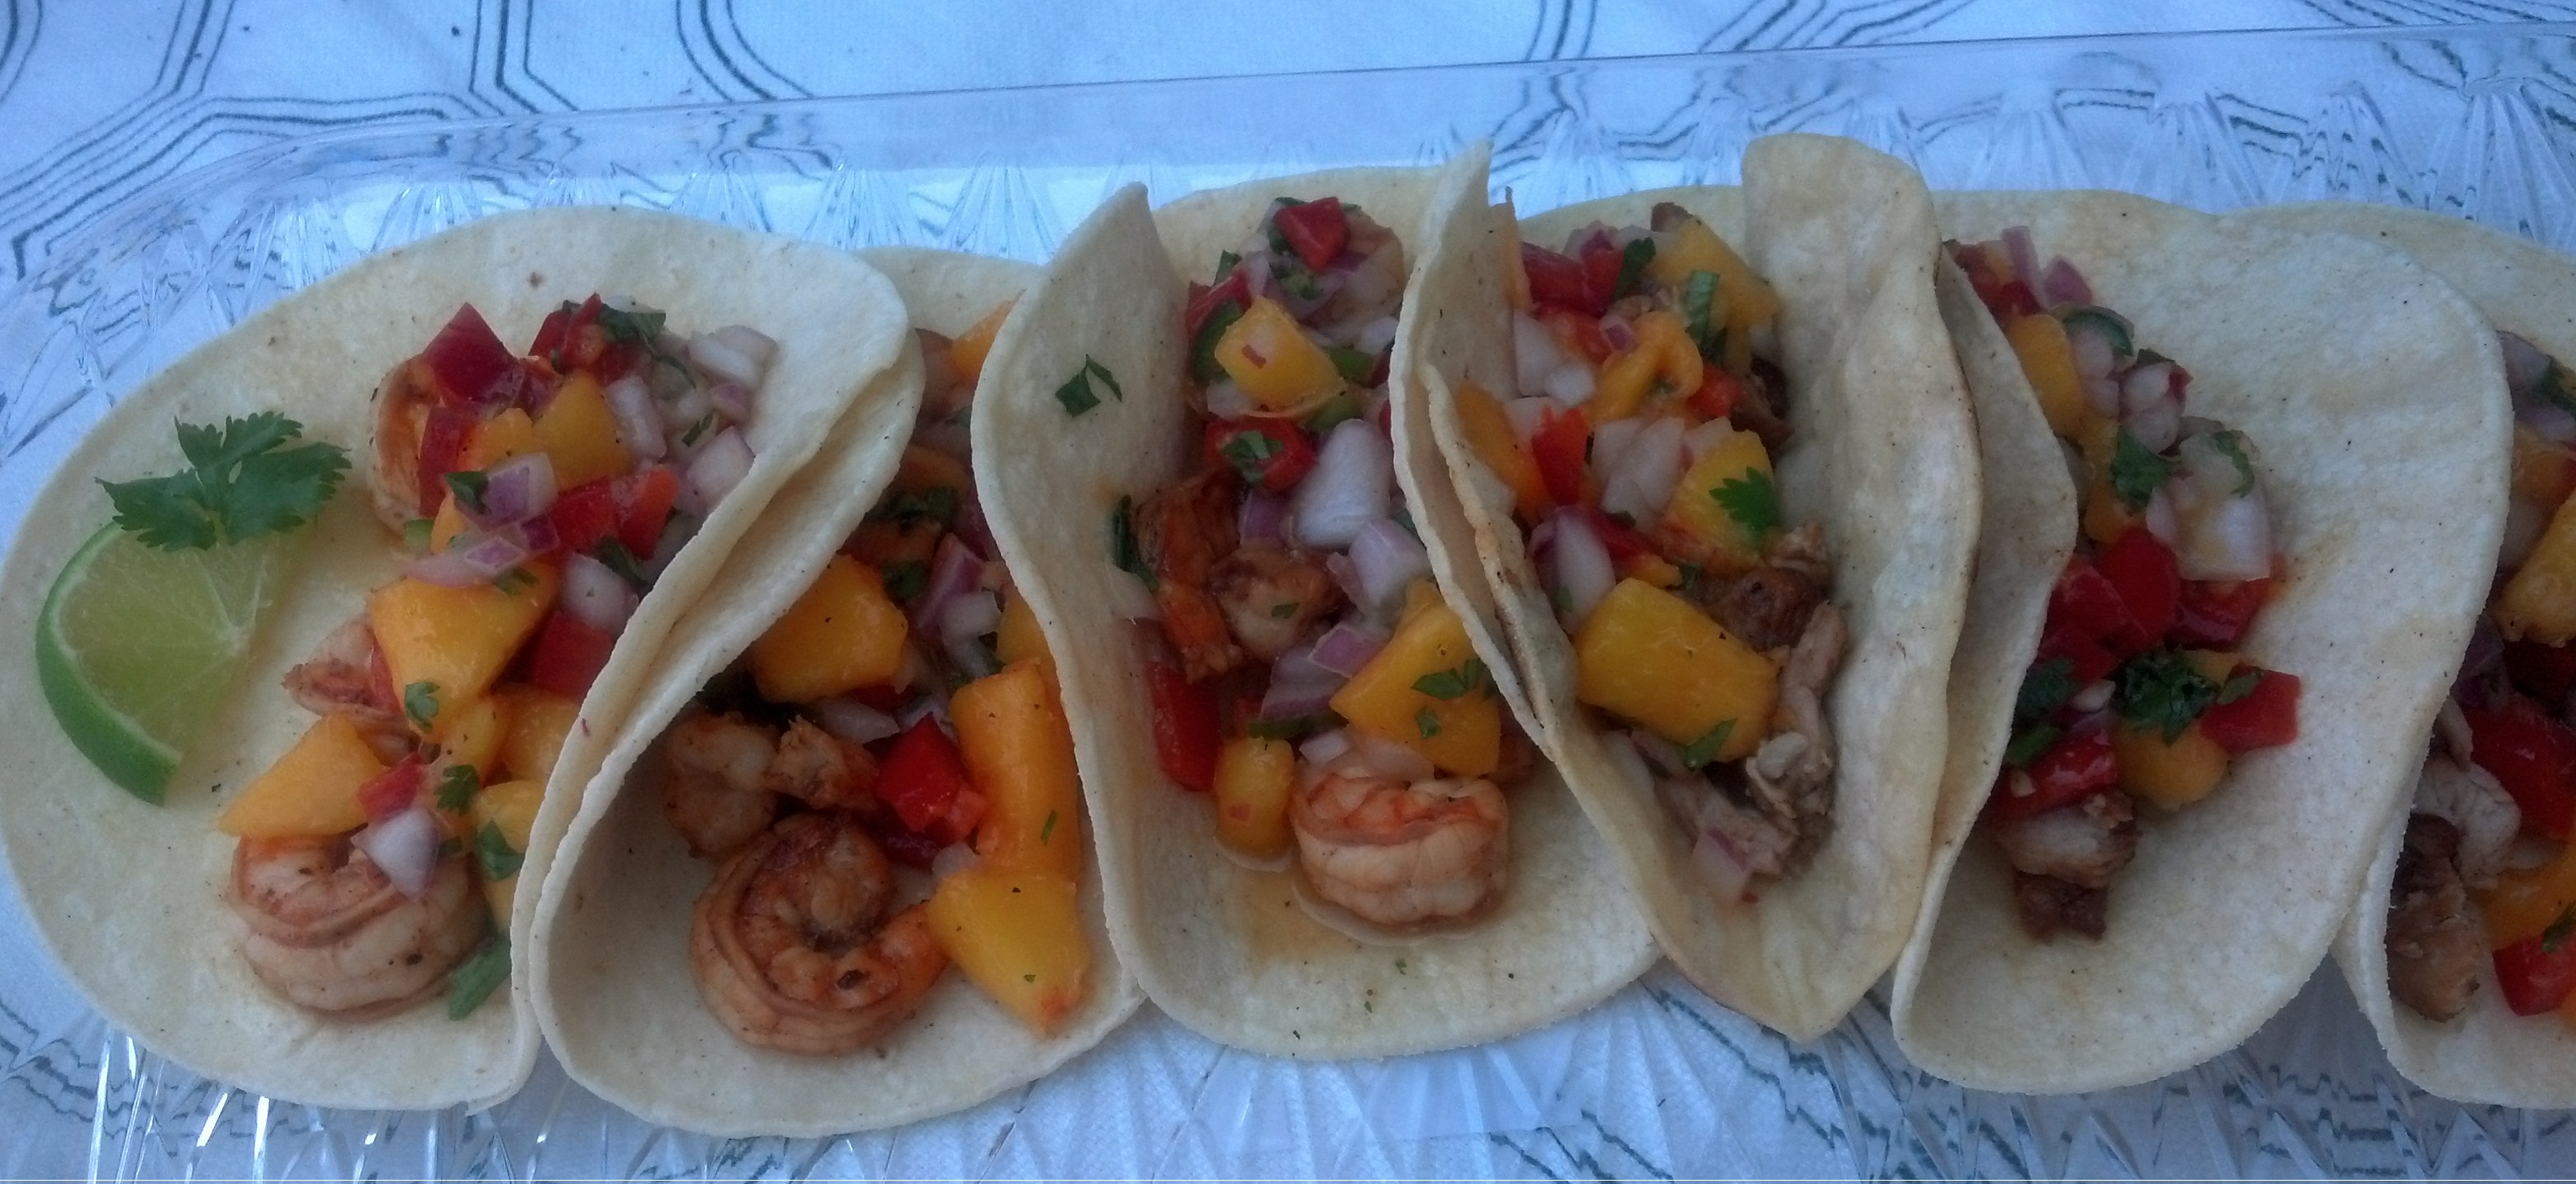 Grilled “You Choose” Tacos with Peach-Jalapeno Salsa